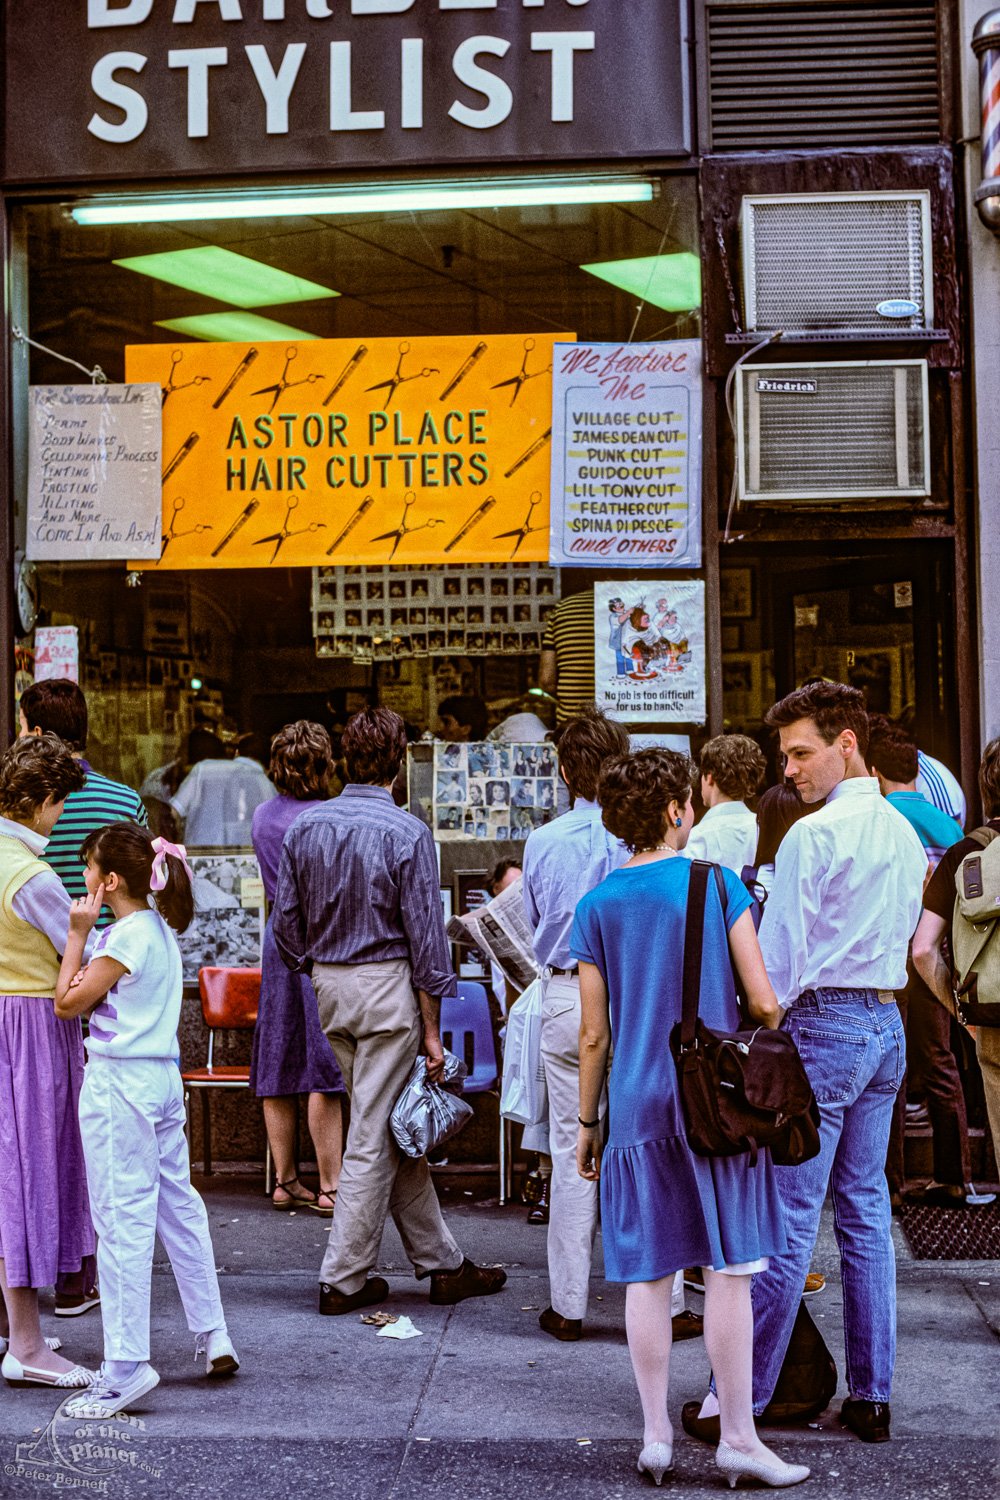 Astor Place Hair Cutters